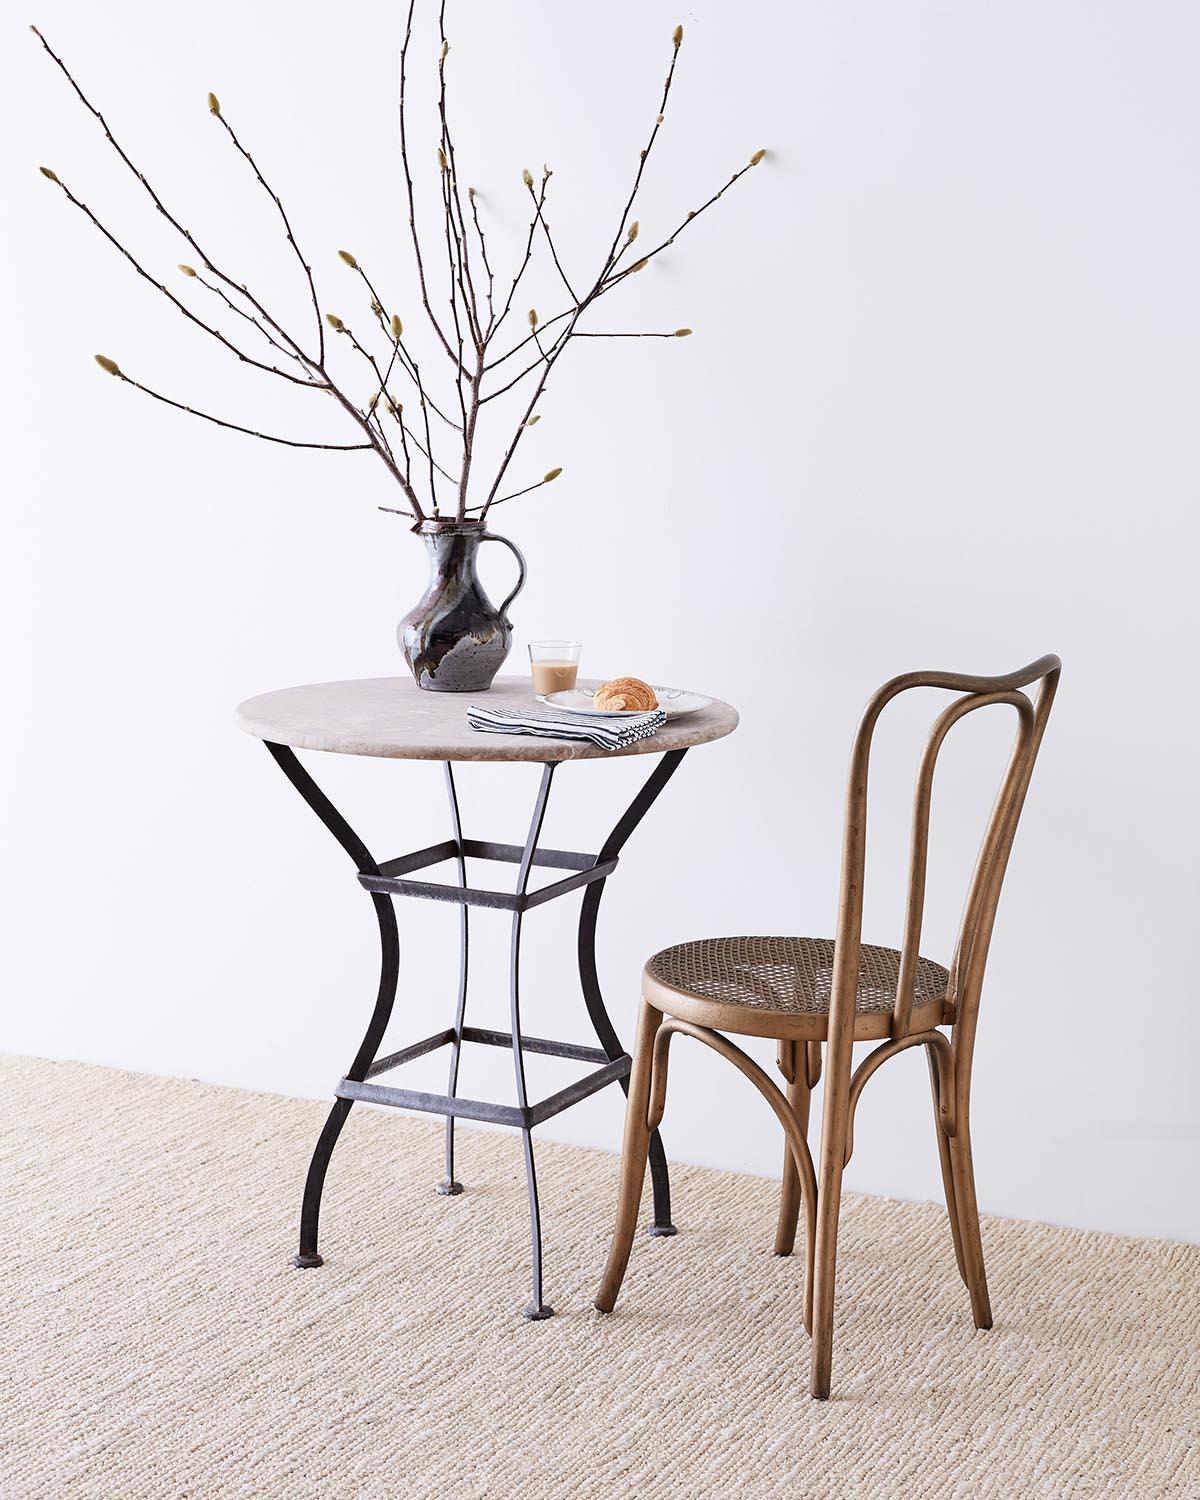 Sculptural French bistro table or cafe table featuring an iron base topped with a later molded stone top. The base is constructed from iron with an hourglass shape conjoined with square stretchers. The round top resembles limestone with natural